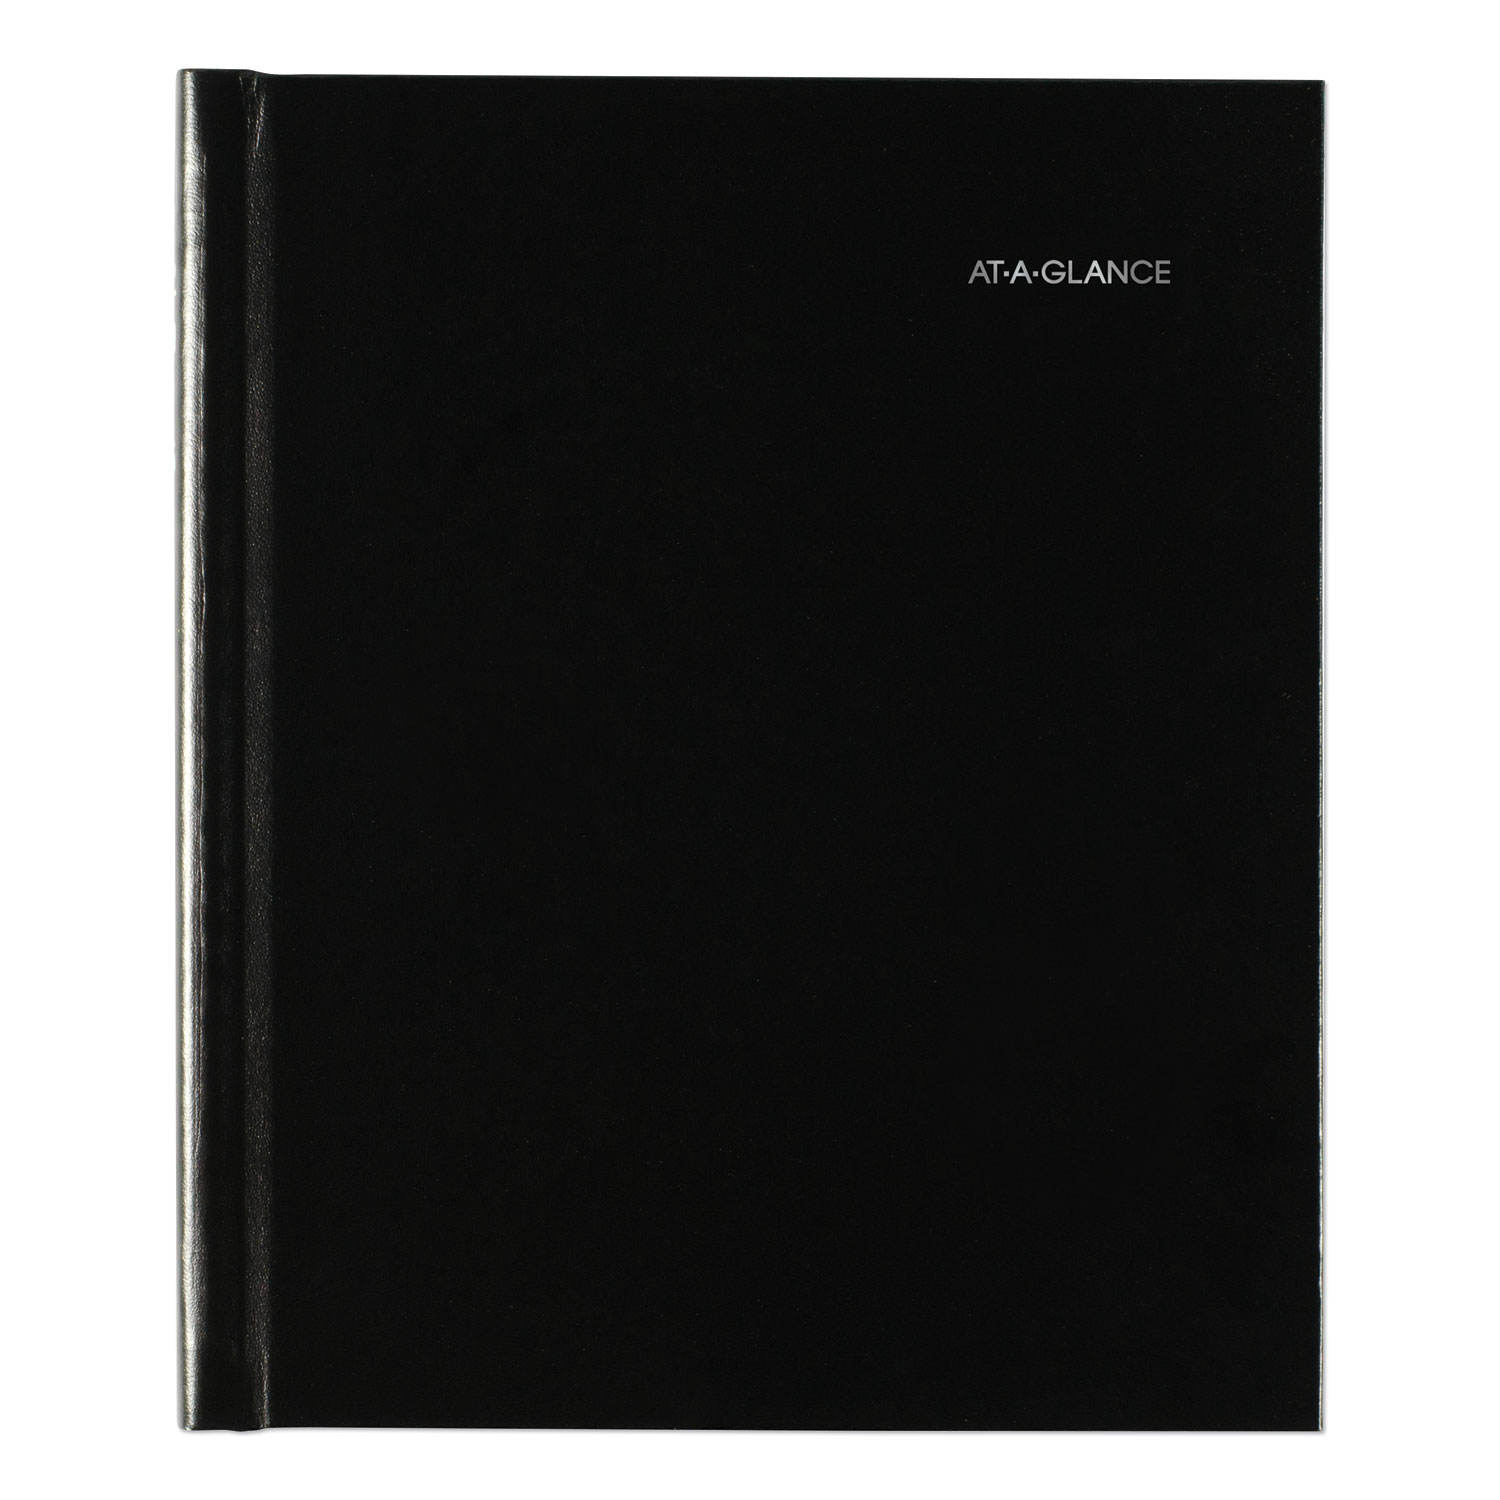  AT-A-GLANCE G400H00 Hard-Cover Monthly Planner, 8 1/2 x 7, Black, 2020 (AAGG400H00) 